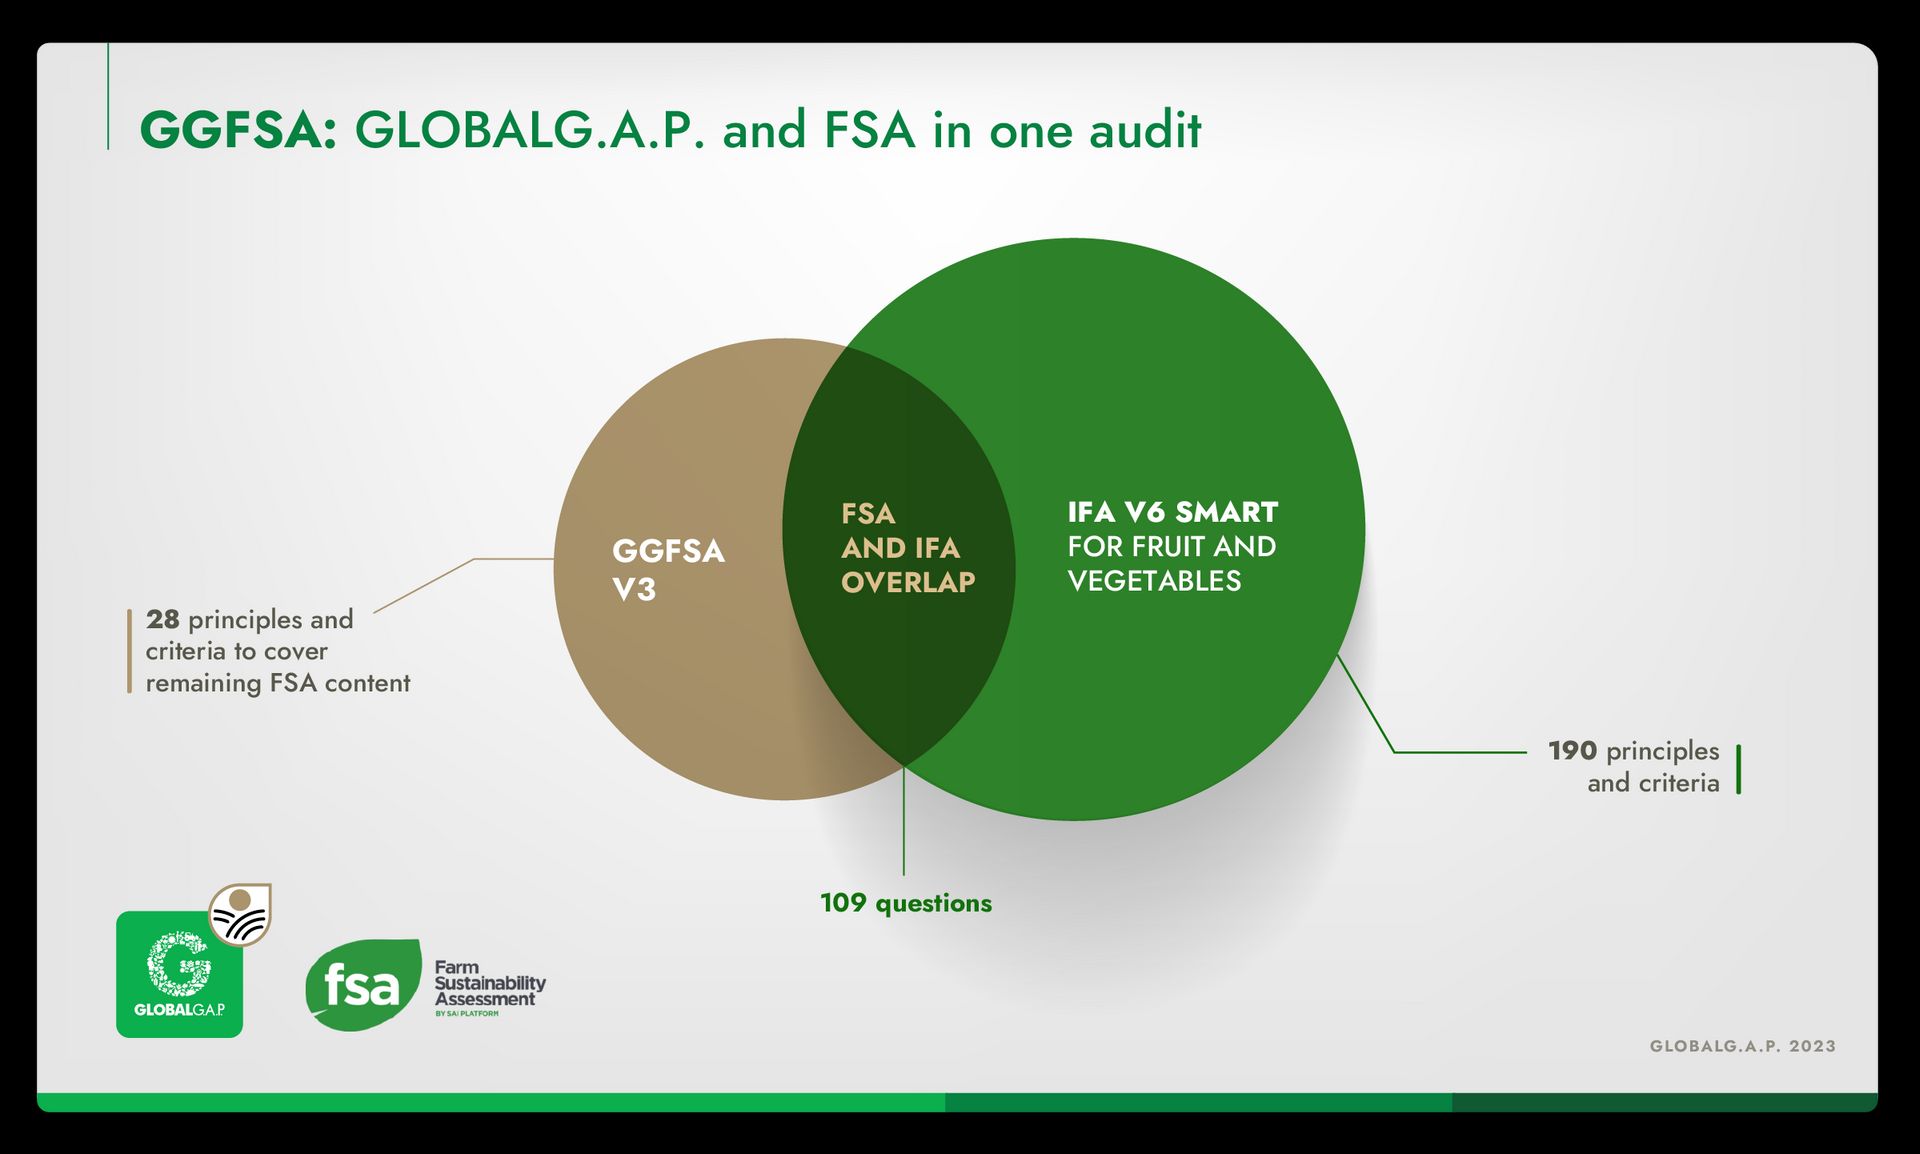 Infographic showing the combination of Integrated Farm Assurance and the GLOBALG.A.P. Farm Sustainability Assessment principles and criteria